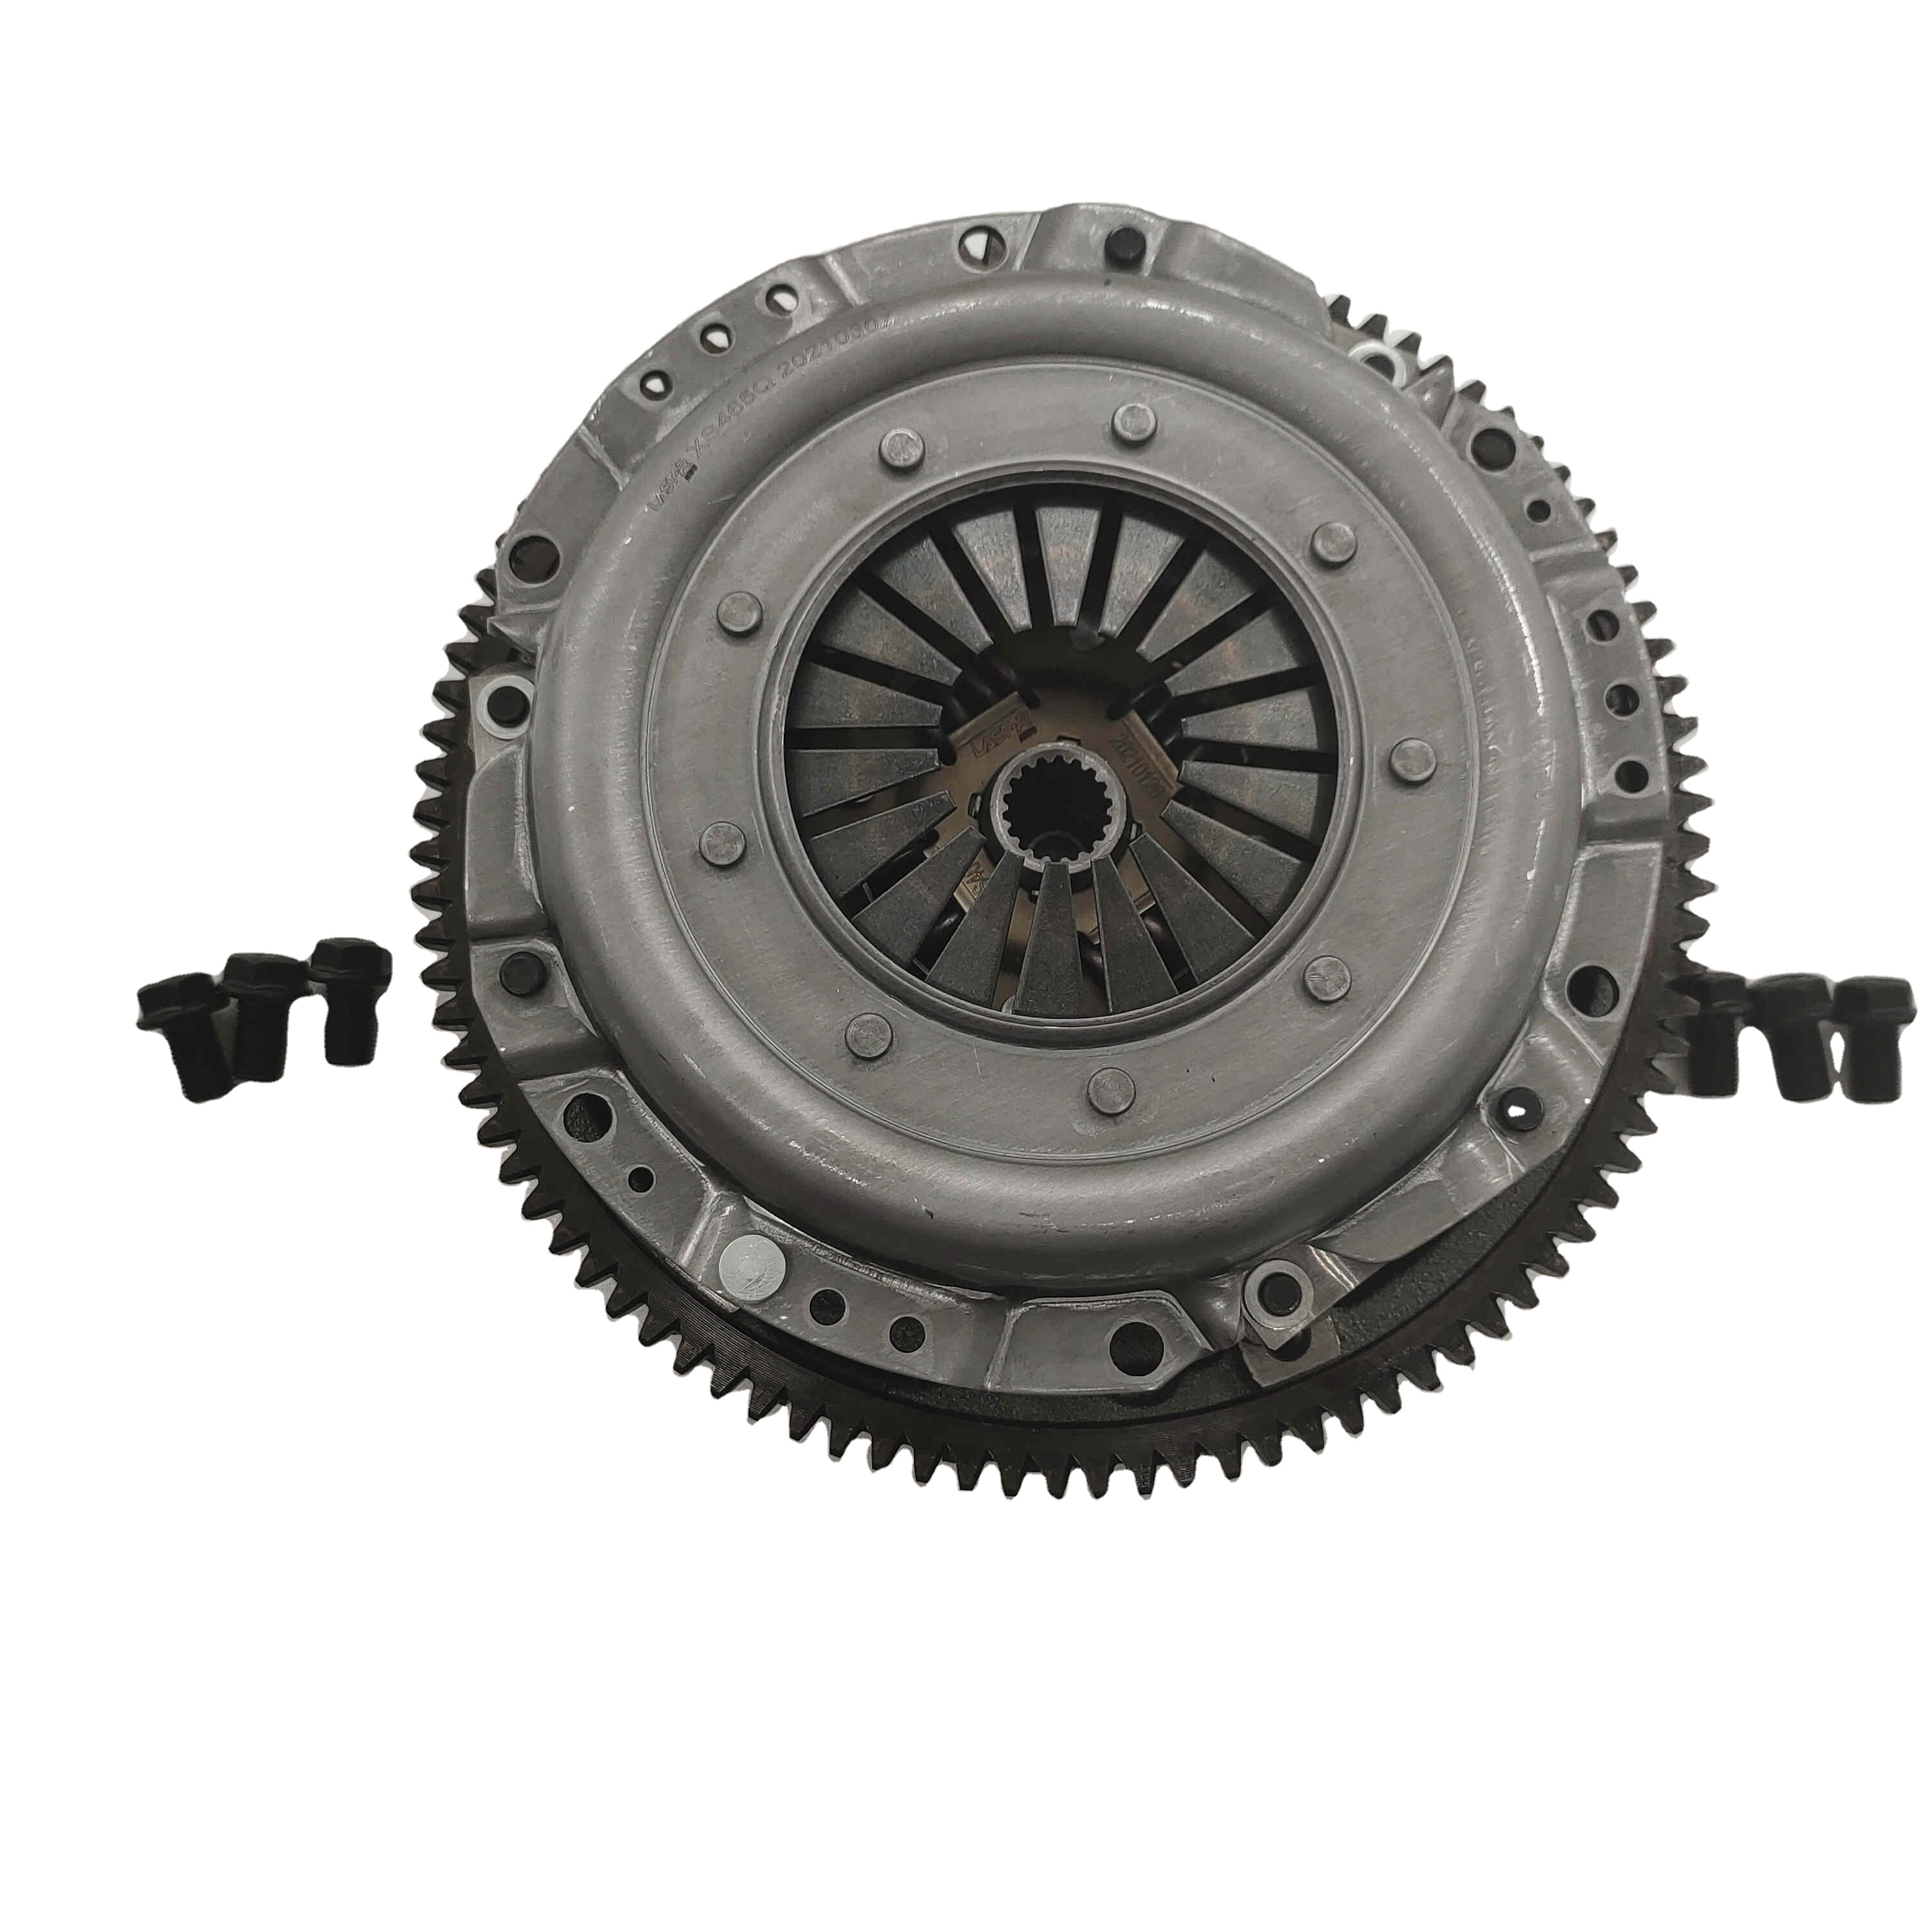 China Factory Direct Injection engine parts for common aluminum alloy Wet  flywheel clutch assembly for global market